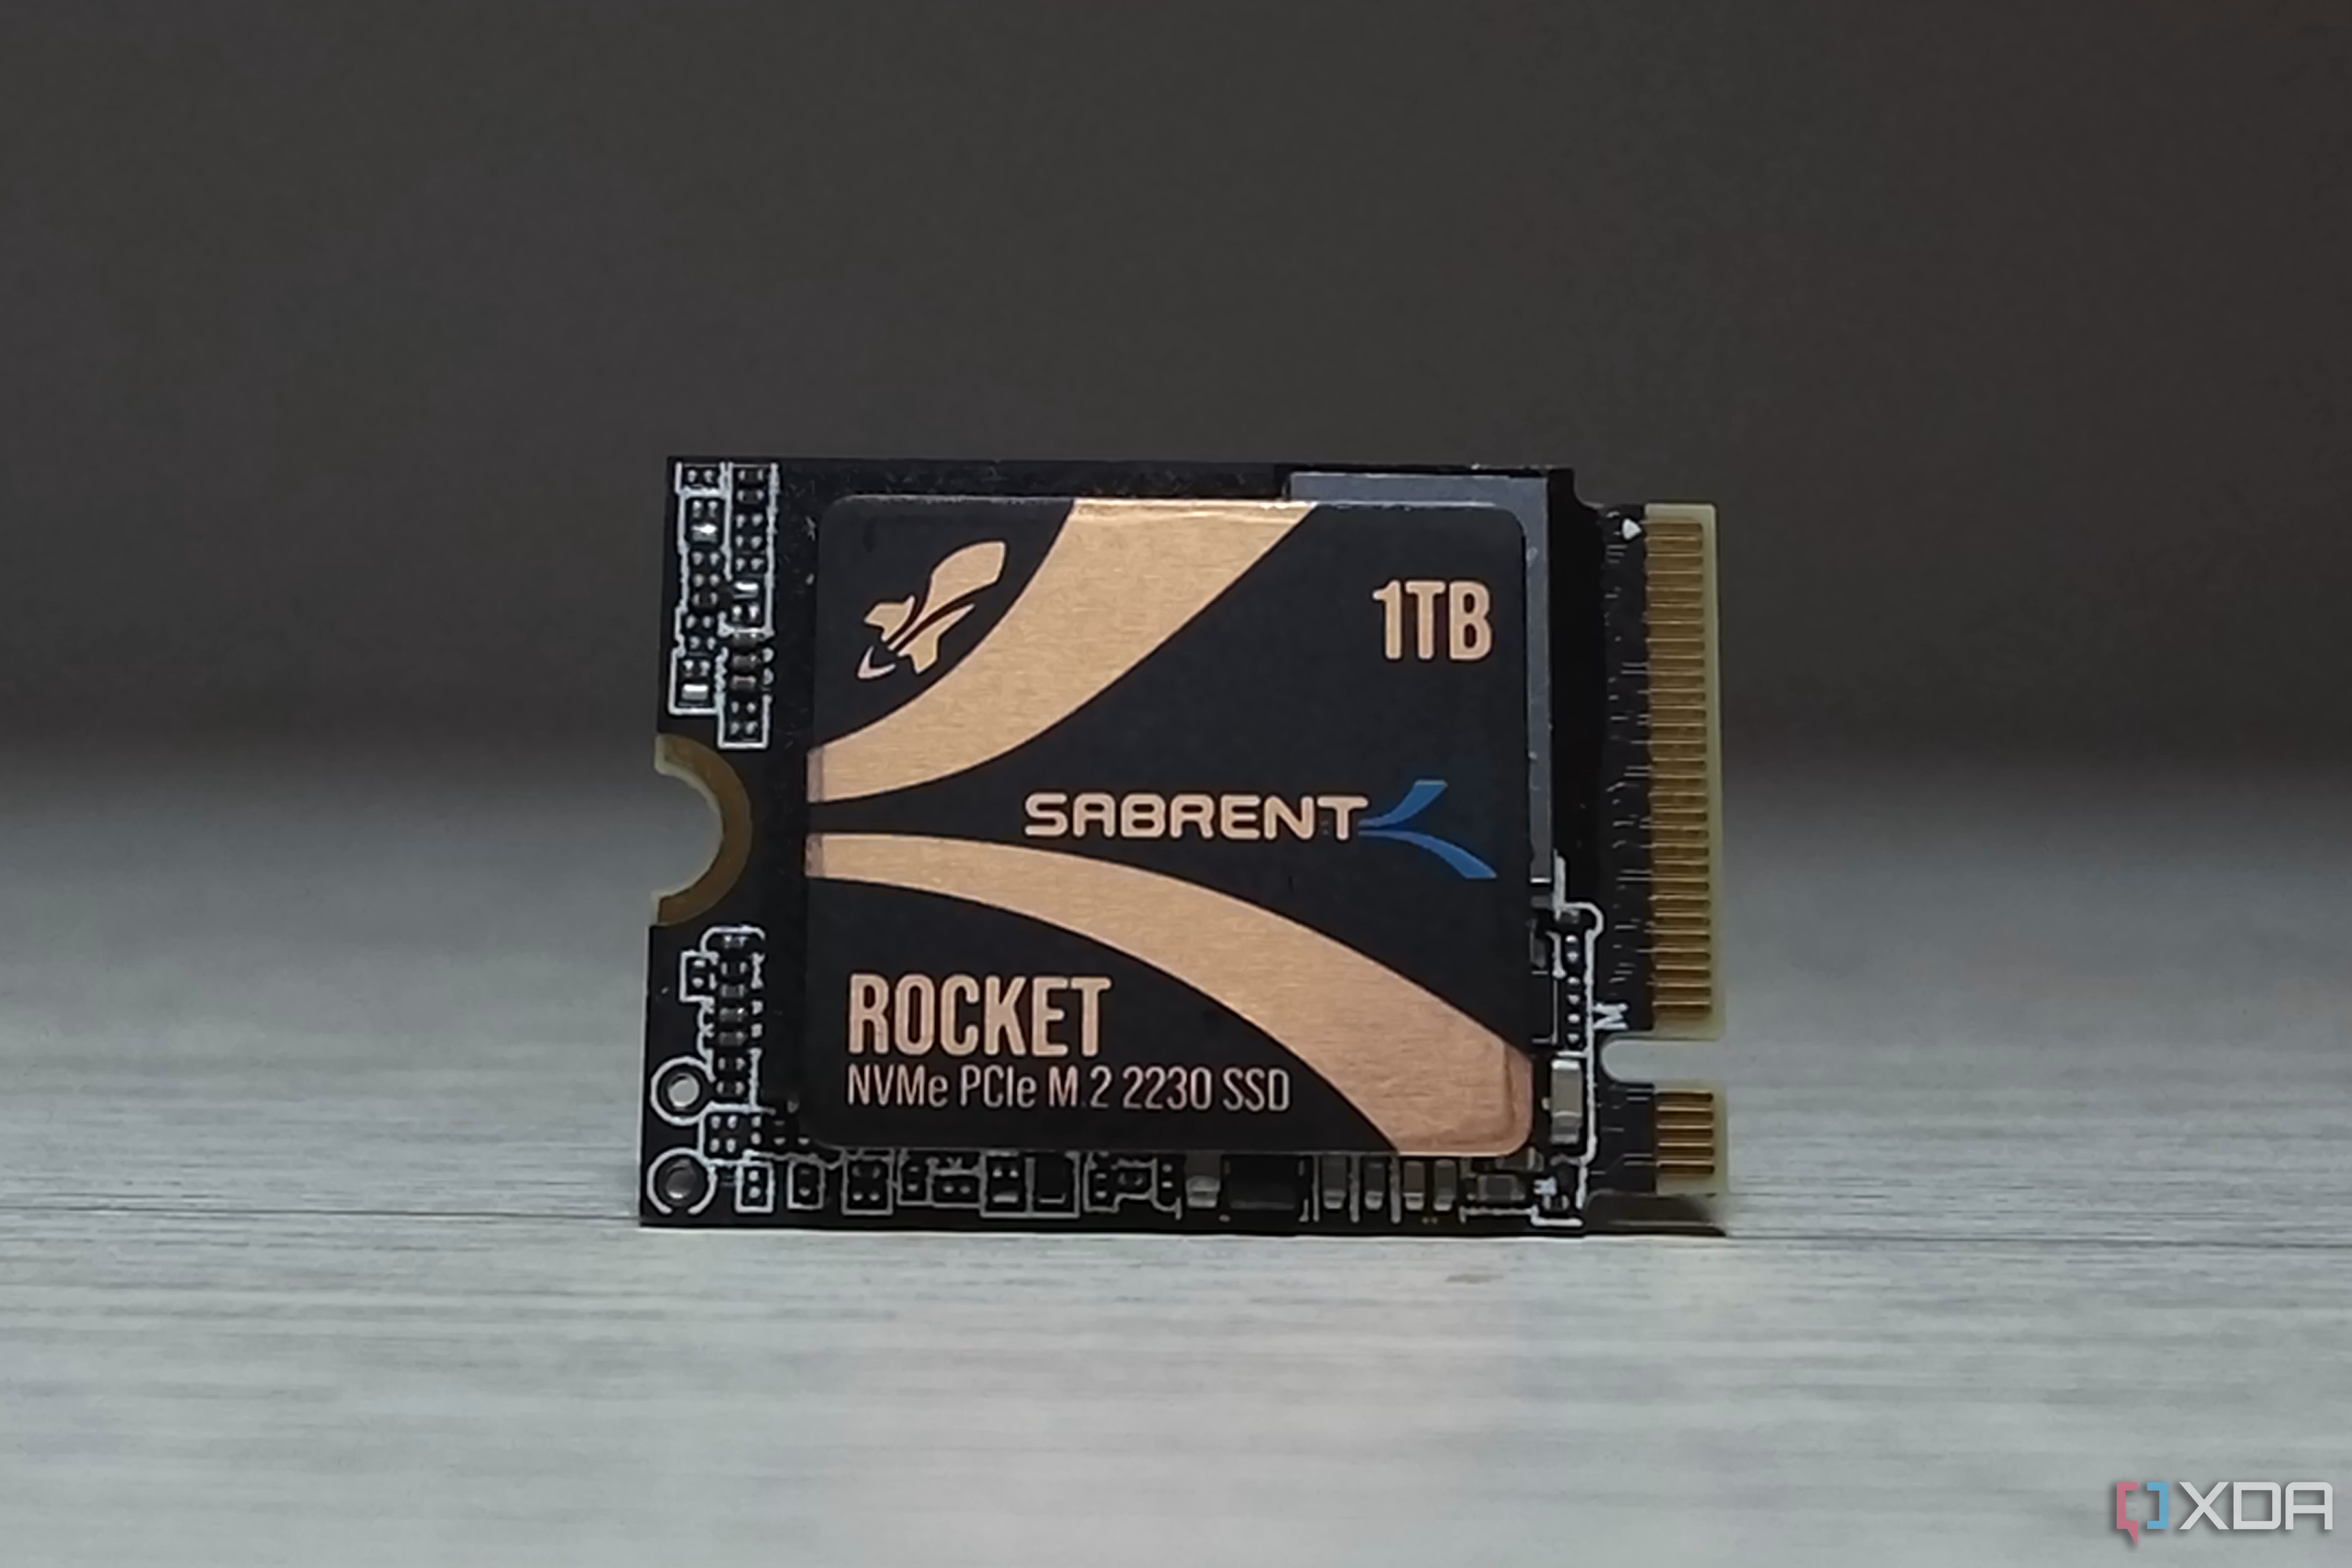 Sabrent Rocket 2230 SSD review: The fastest drive for the Steam